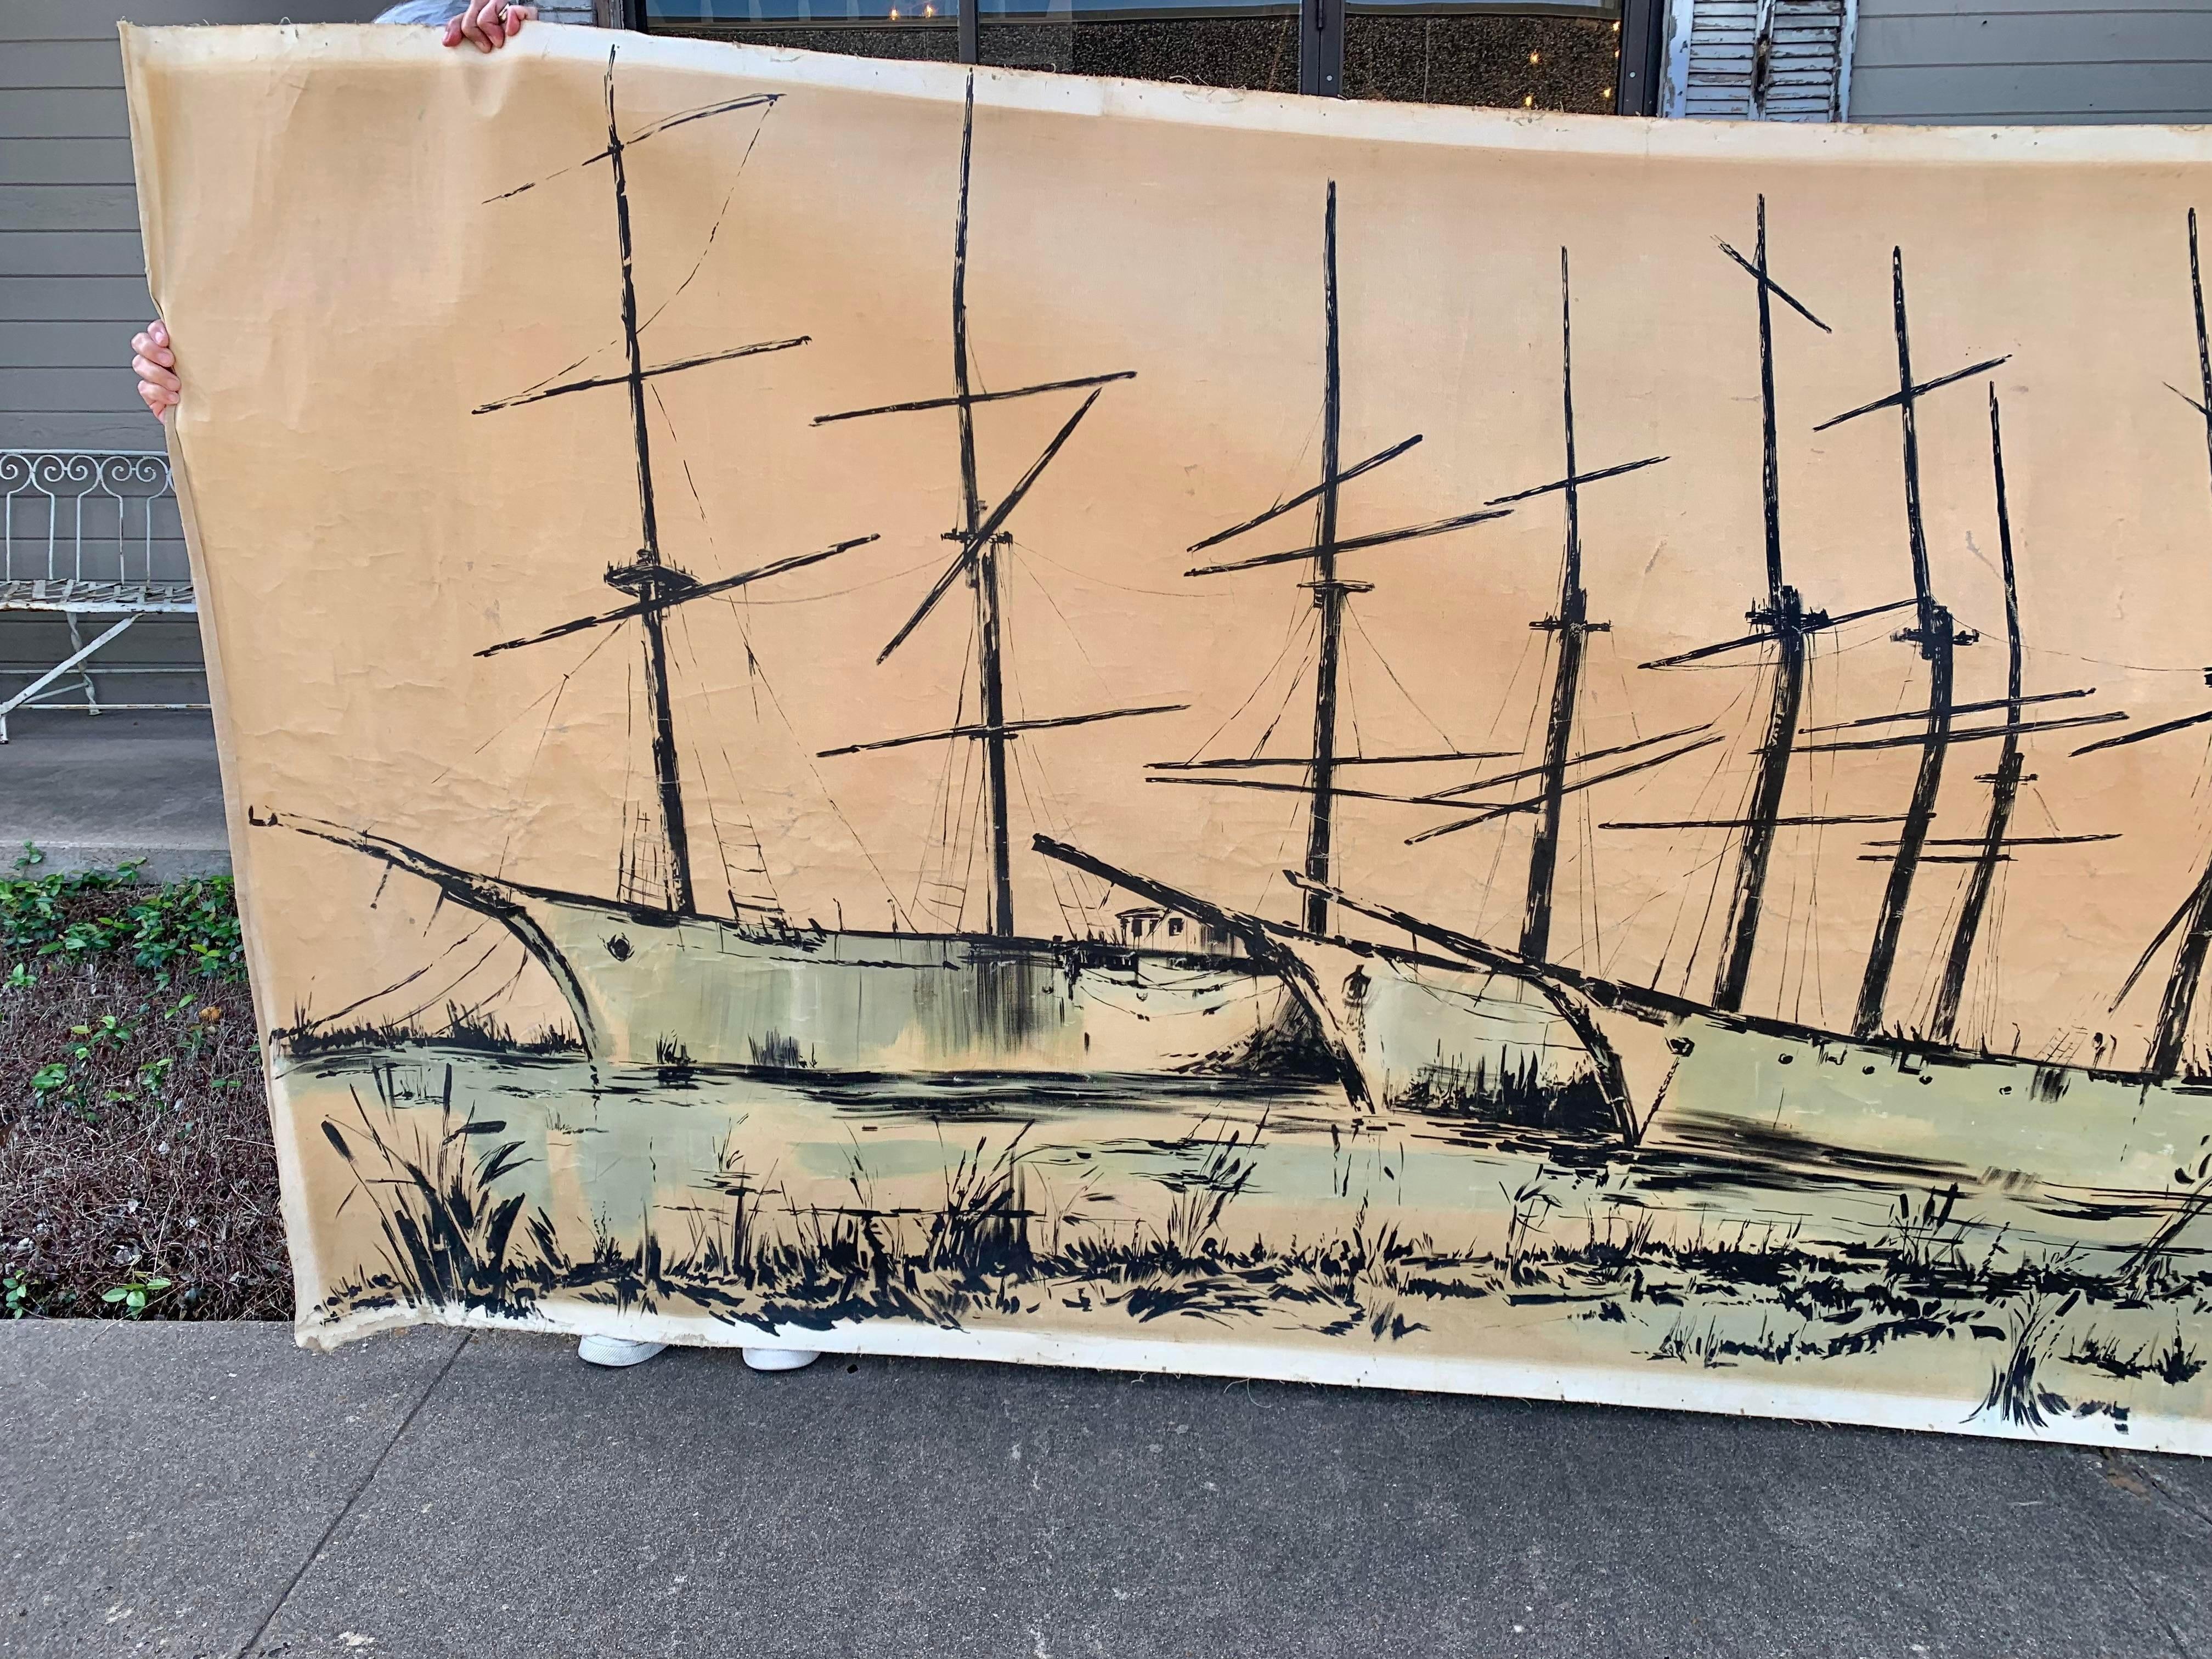 Found in the South of France this Early 20th century French Artist Signed Painting depicts several schooner sailing ships at dock in a French village. Schooner ships were built primarily for cargo, passengers, and fishing. The piece is signed by the